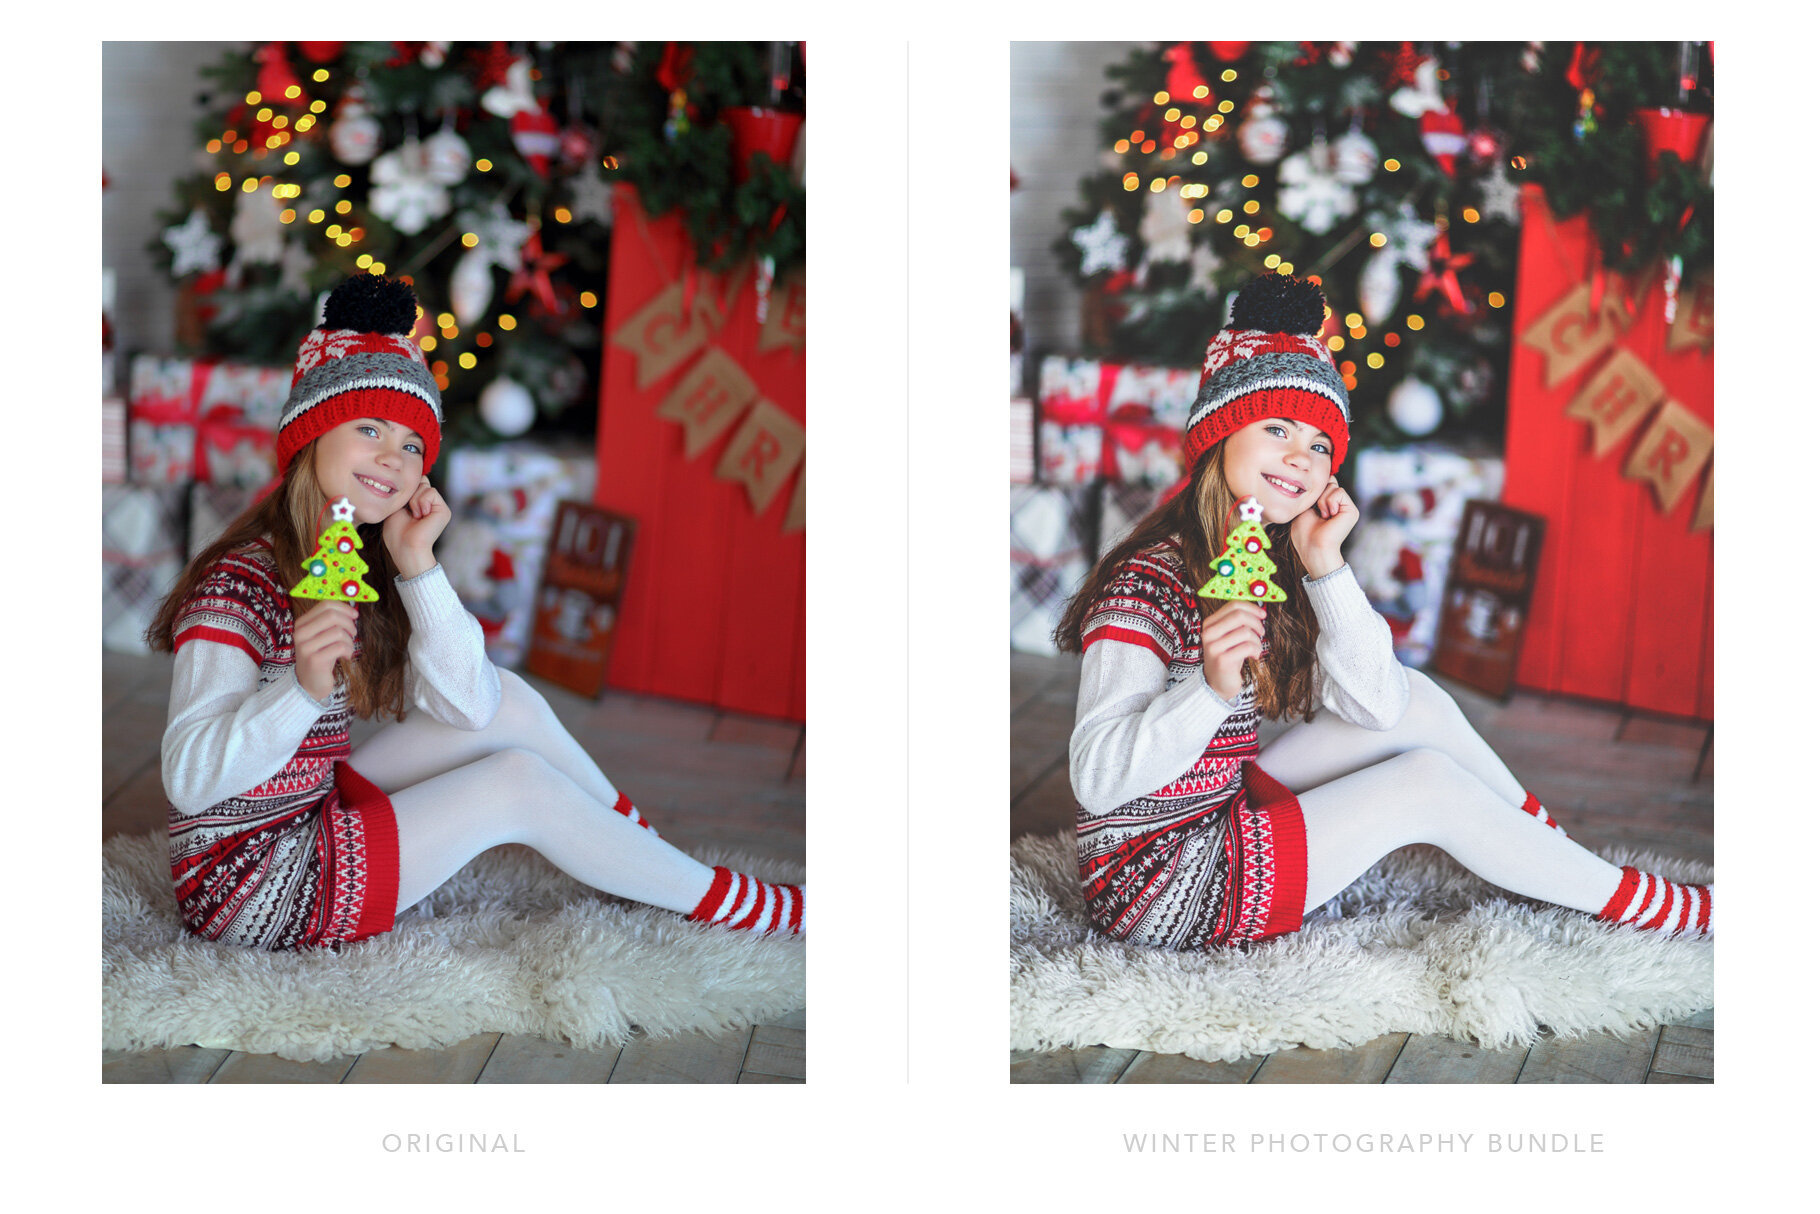 Indoor Christmas photography presets for lightroom